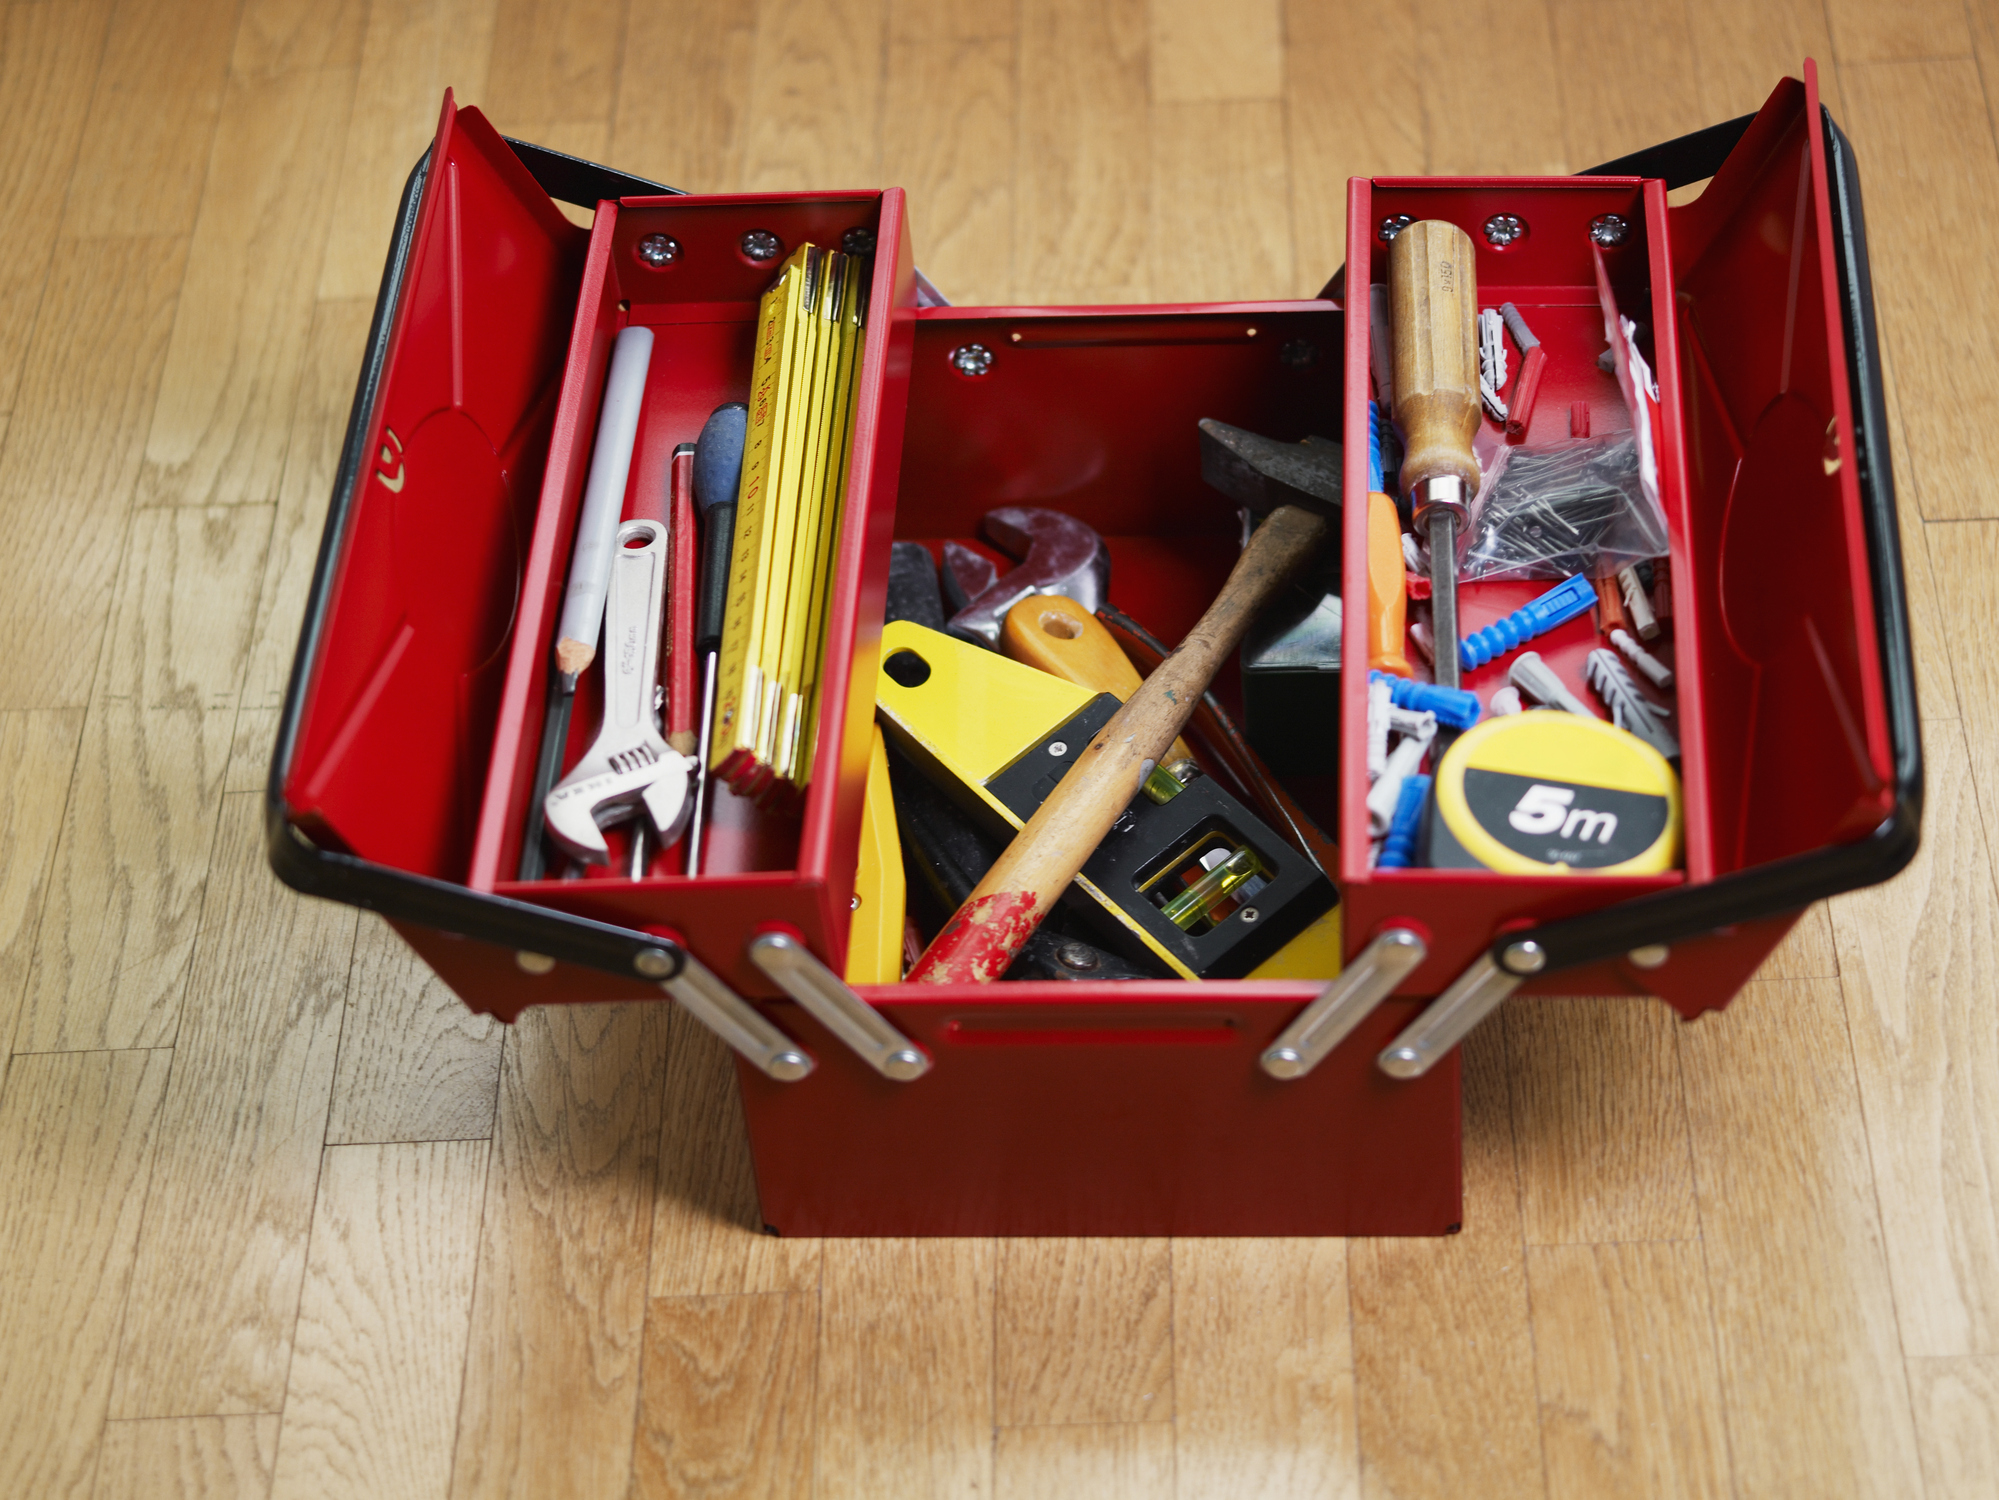 Tool box filled with tools